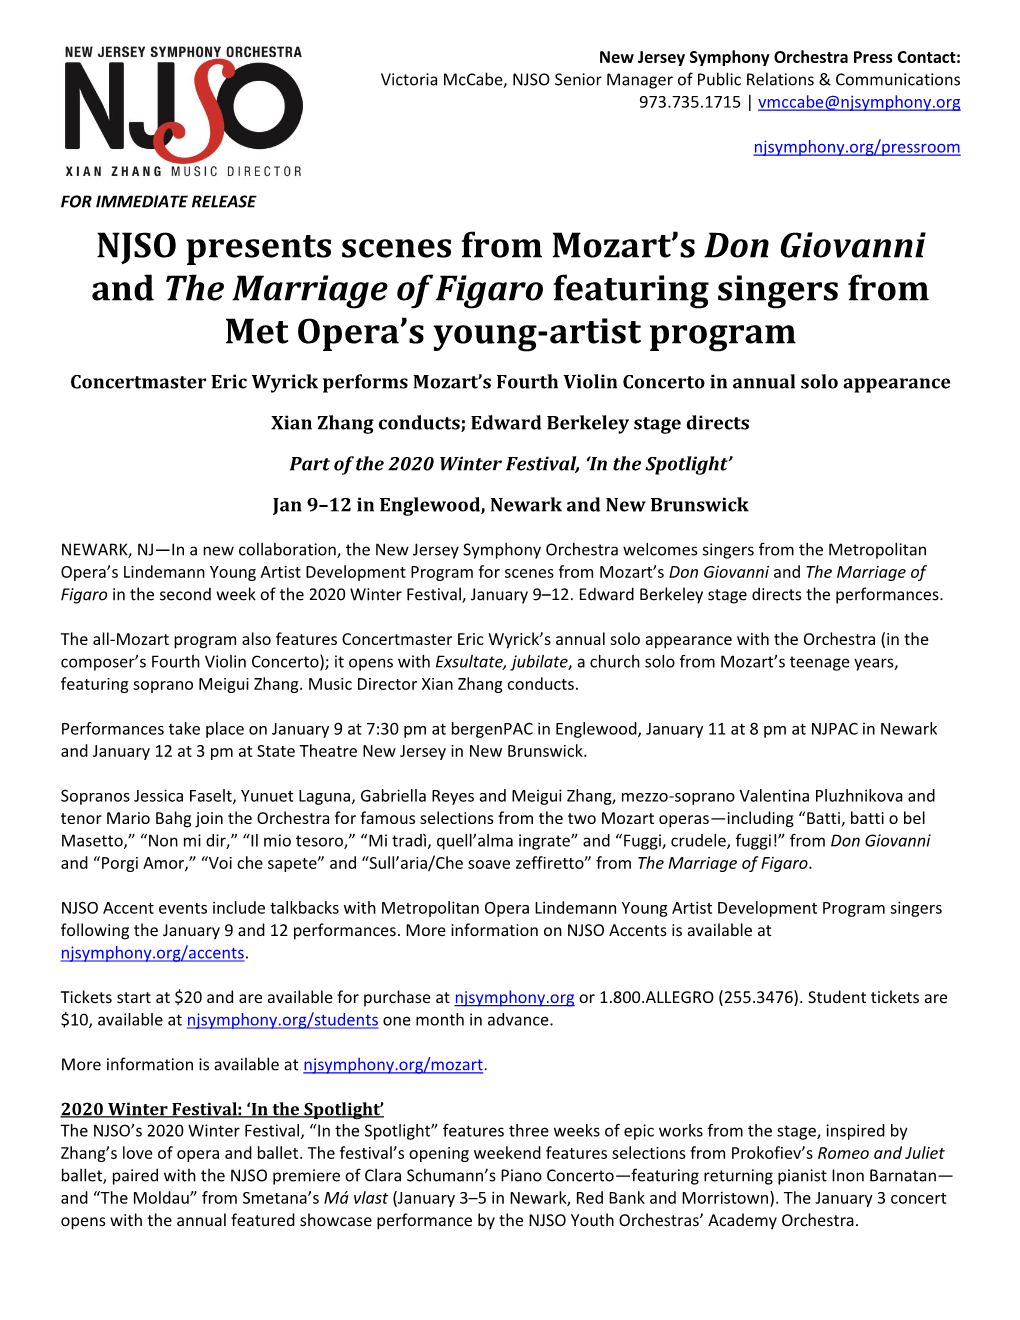 NJSO Presents Scenes from Mozart's Don Giovanni and the Marriage Of